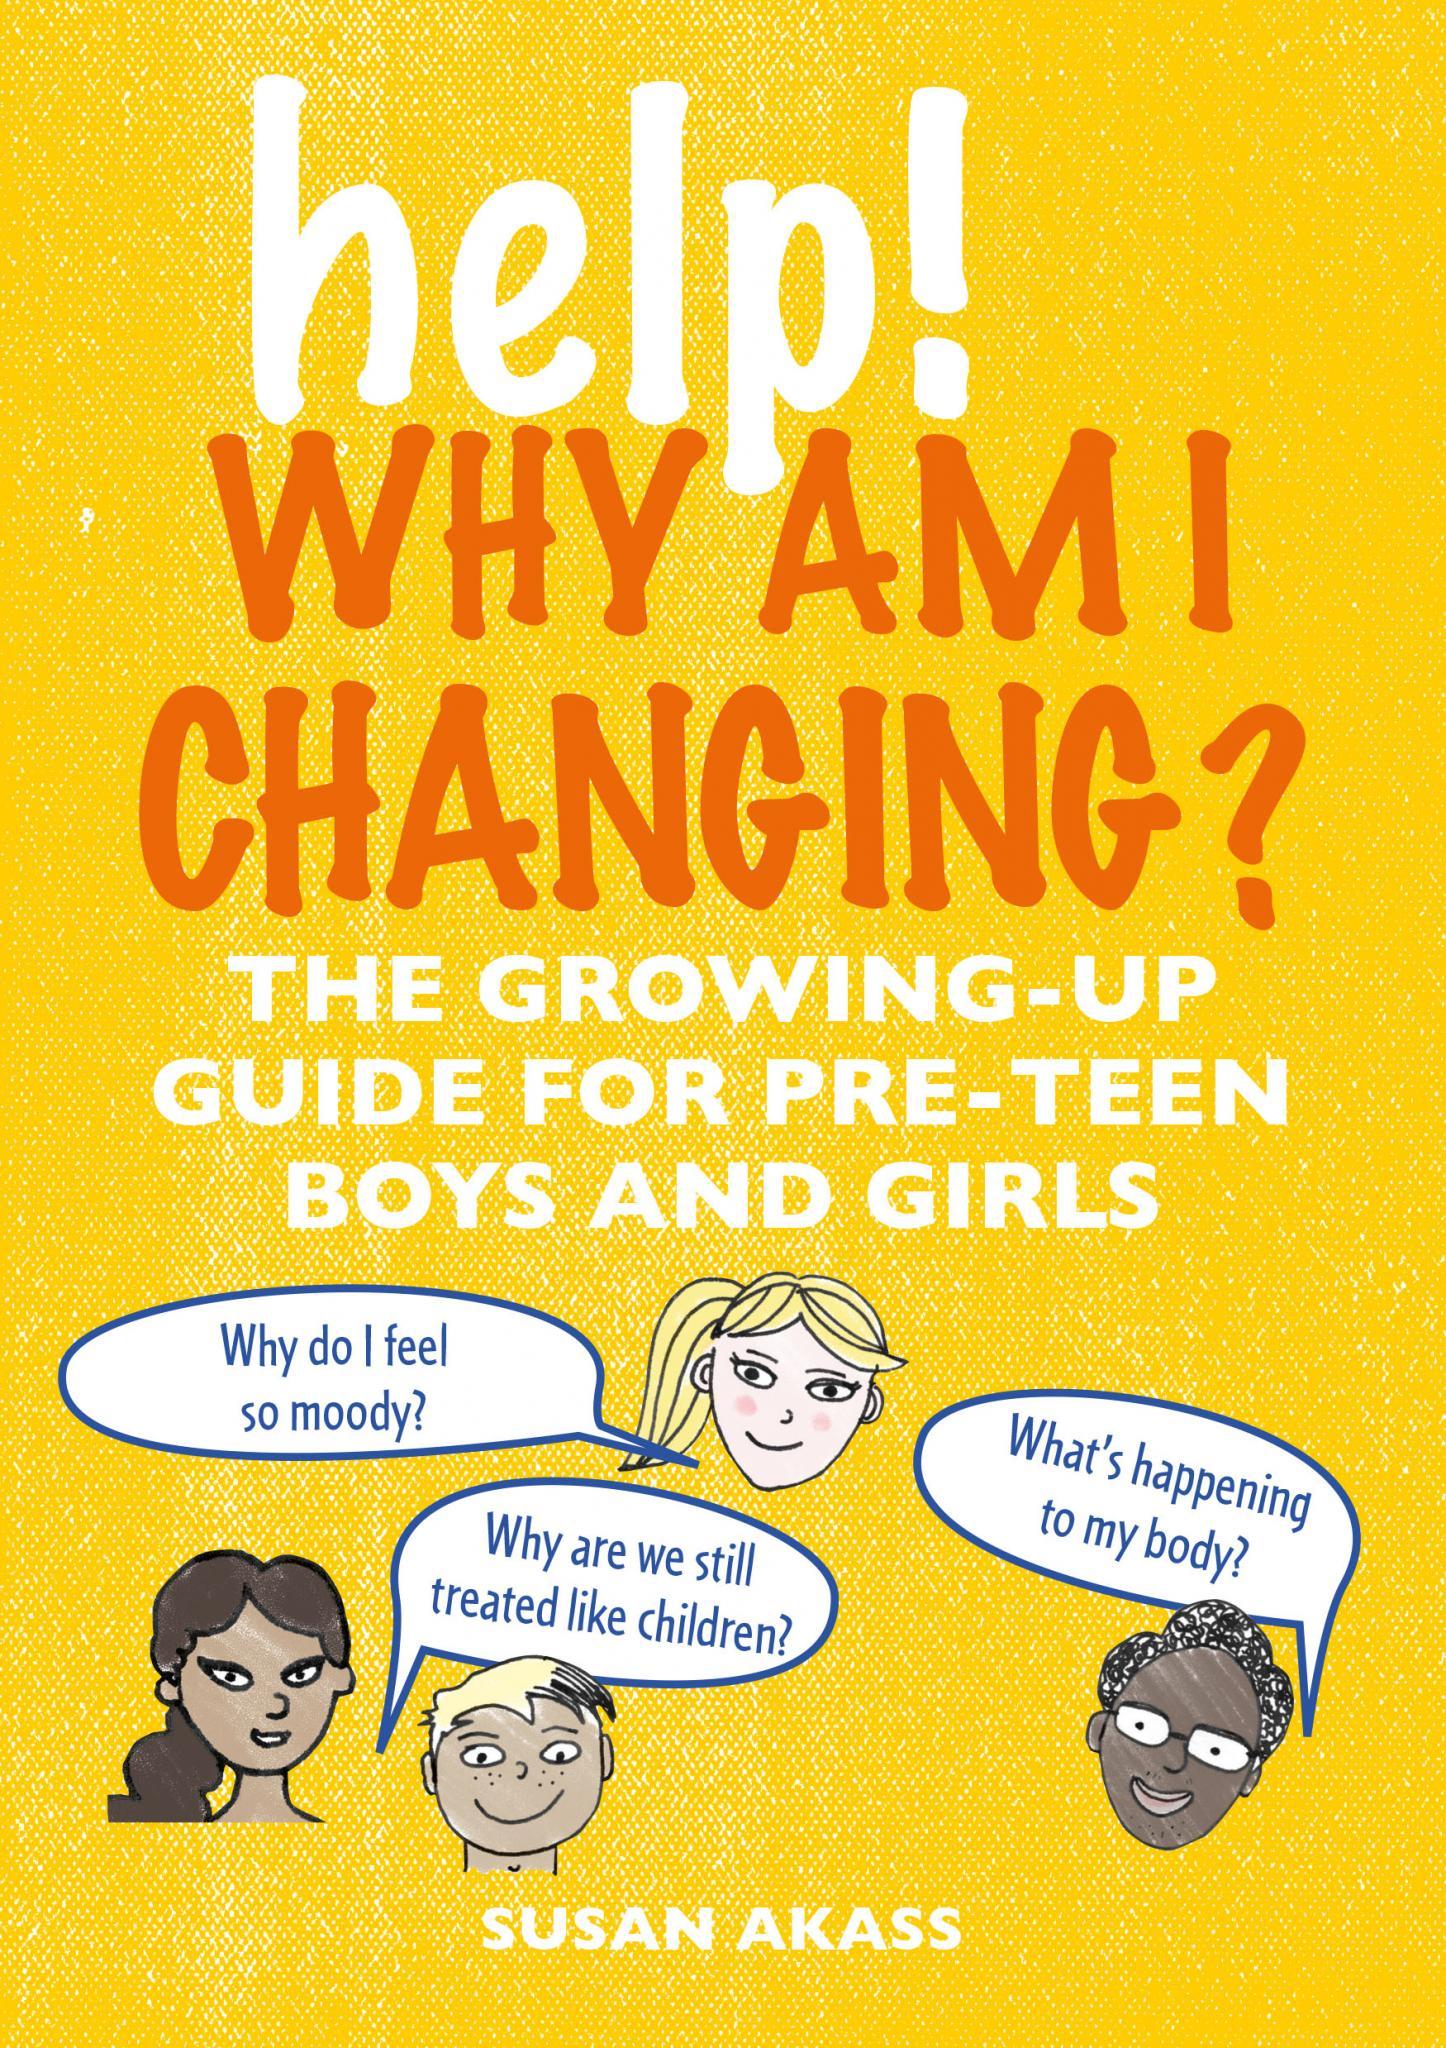 Help! Why Am I Changing? What's Happening to Me? The Growing up guide for pre-teen boys and girls